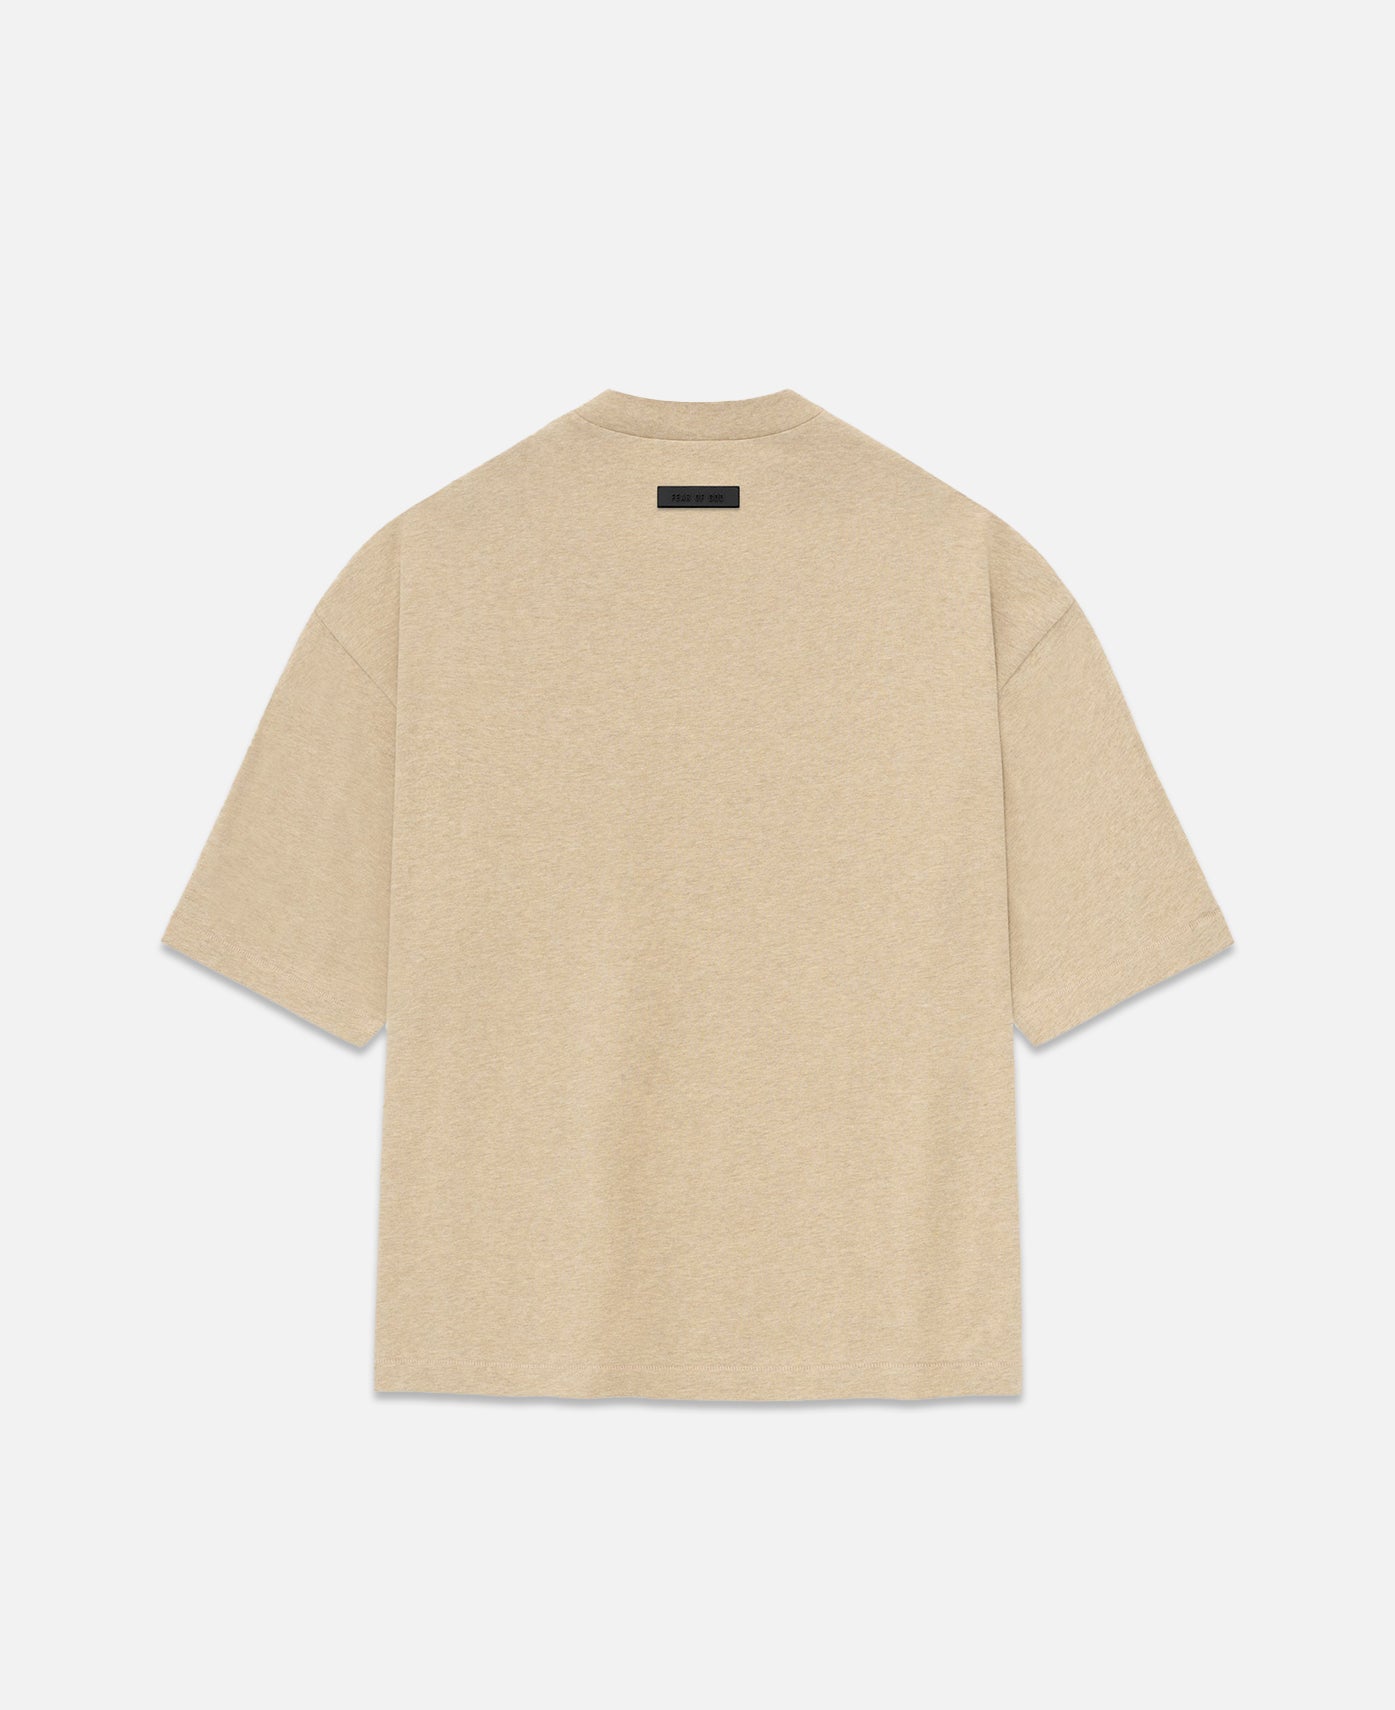 My Quick Fear Of God Essentials T-Shirt Sizing Guide 